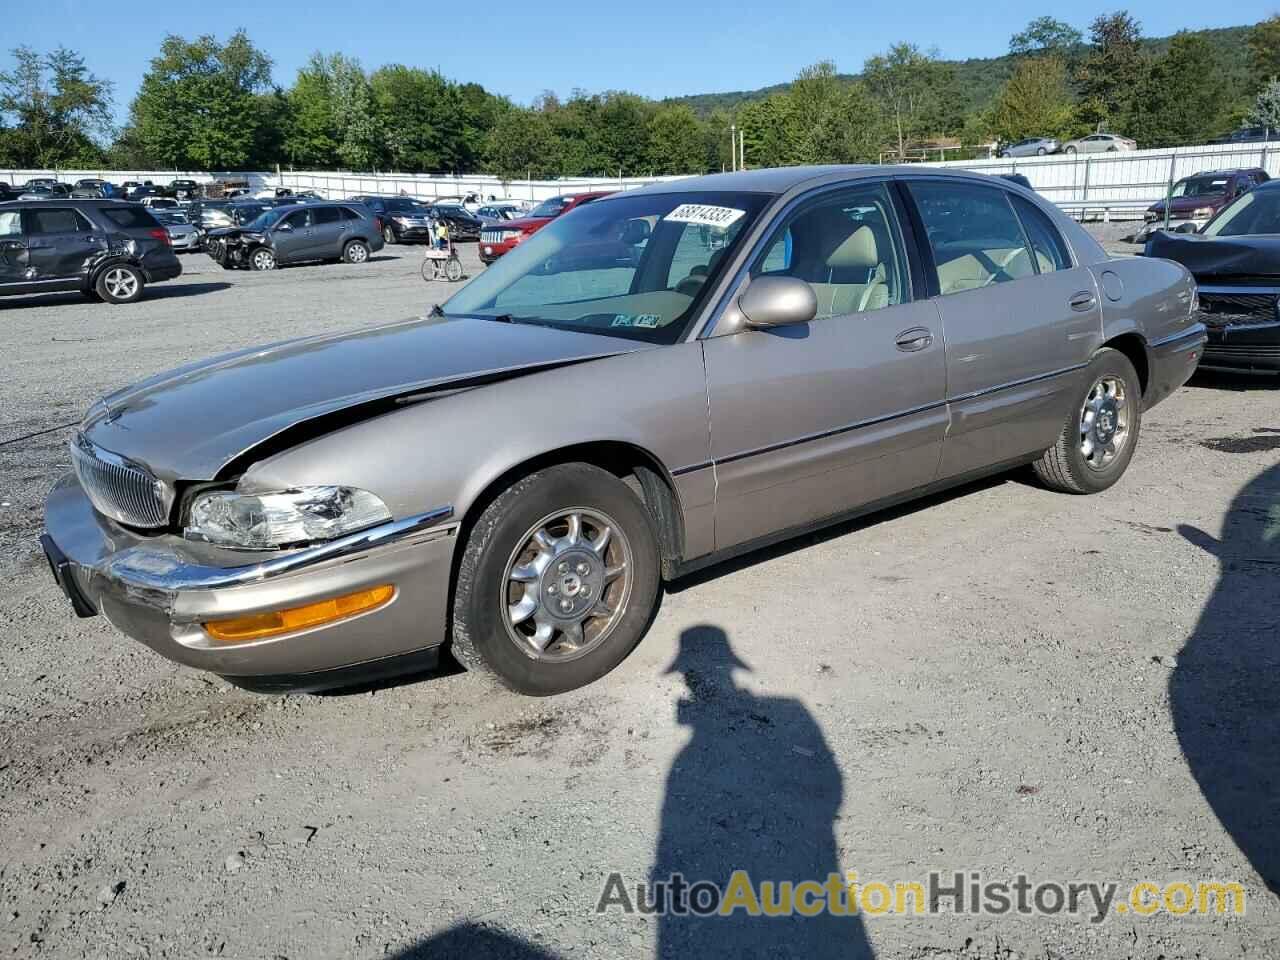 2004 BUICK PARK AVE, 1G4CW54K144115317